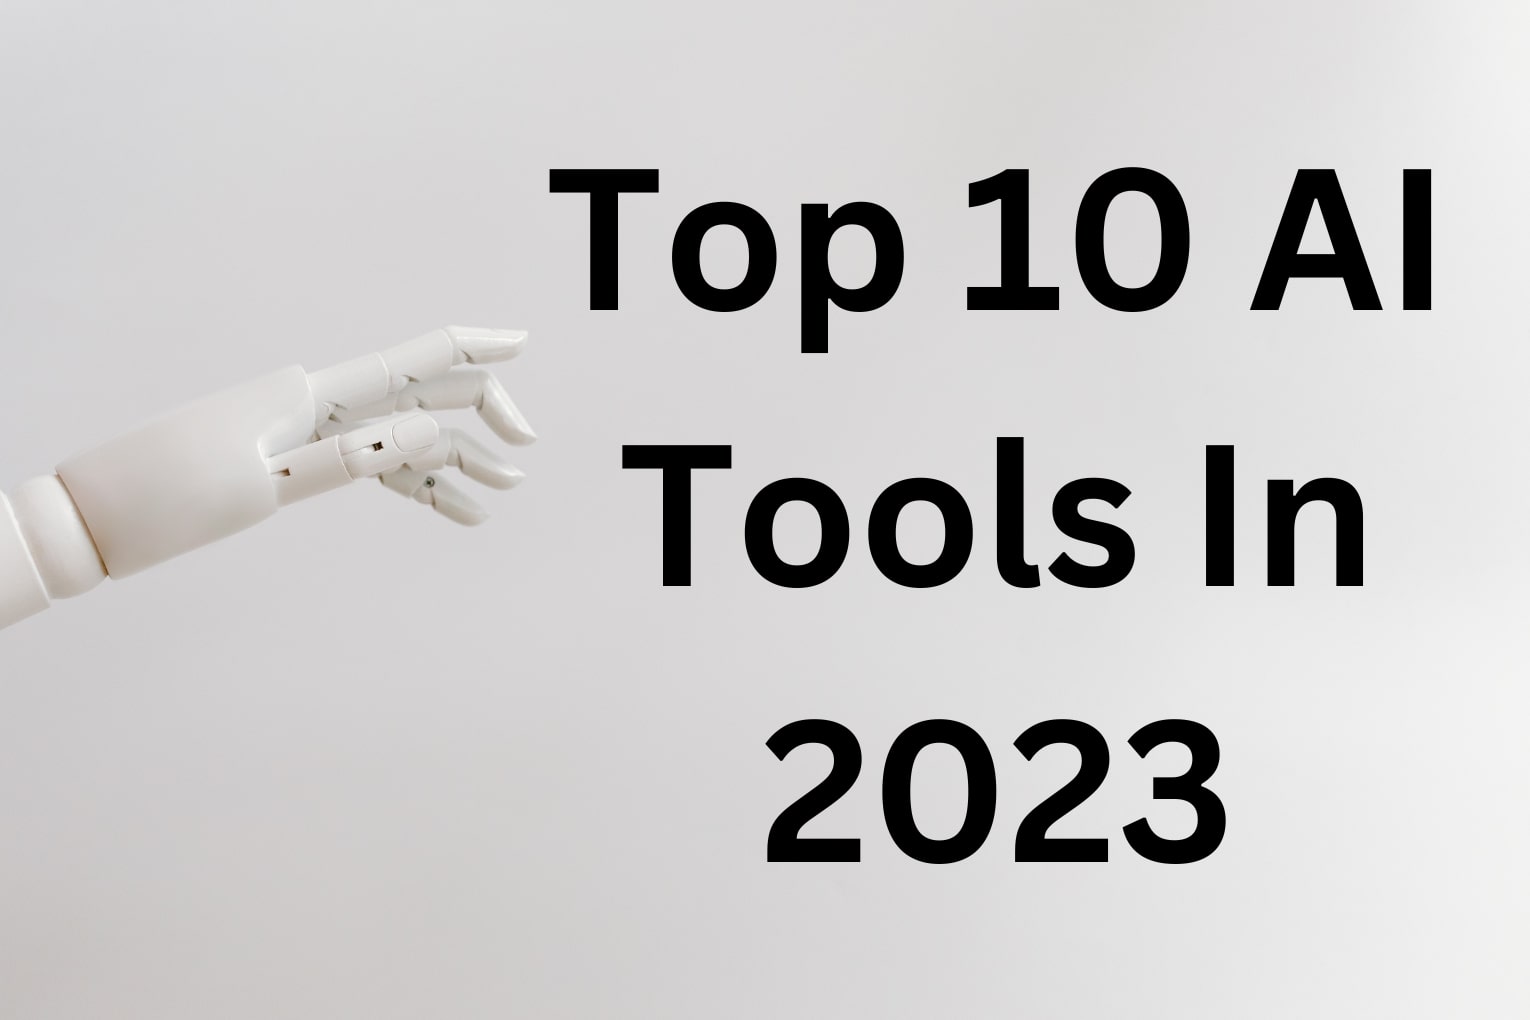 Top 10 AI tools in 2023